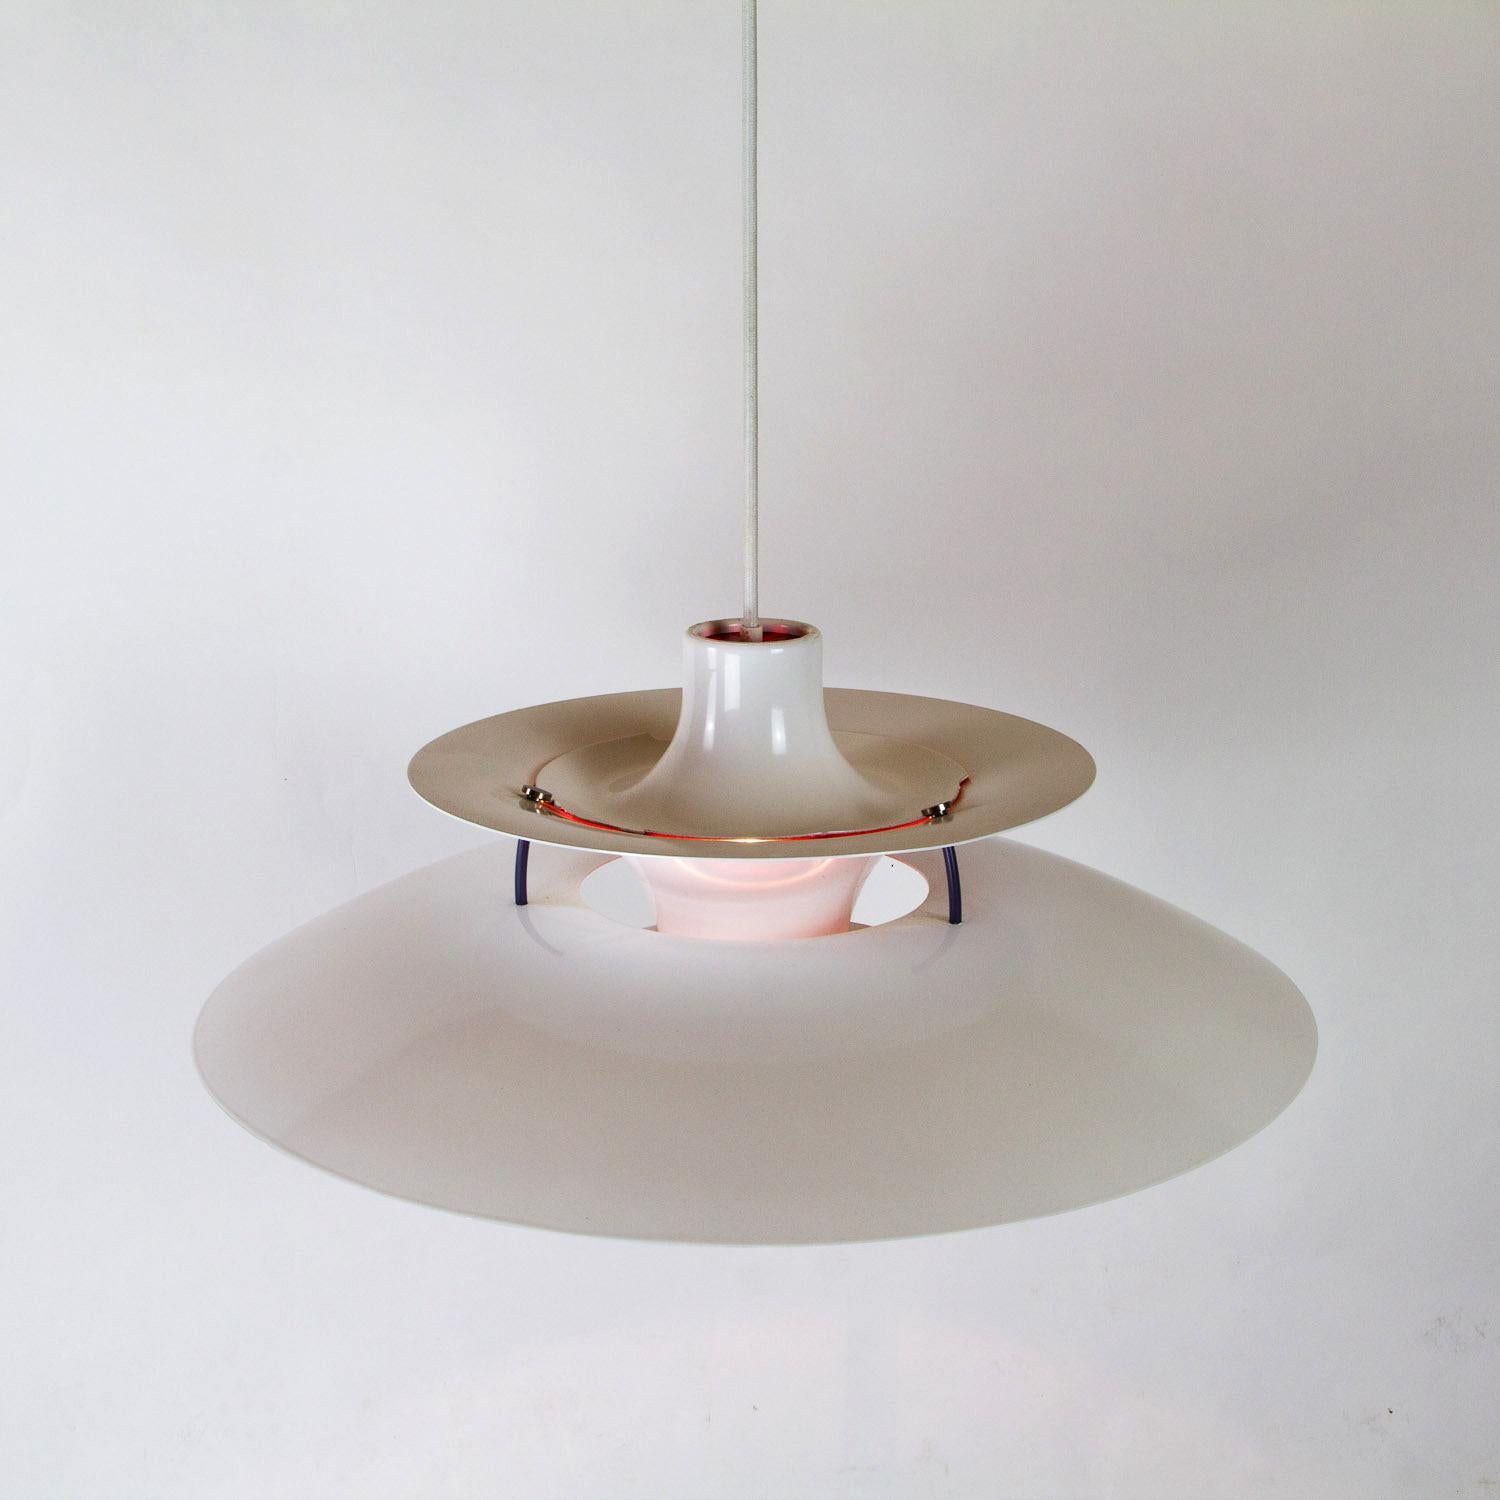 A restored and resprayed white PH5 ceiling light designed by Poul Henningsen for Louis Poulsen. Designed in 1958 the PH5 is one of the most elegant and iconic pendant lights to come out of Denmark. The layered shades have been designed to hide the